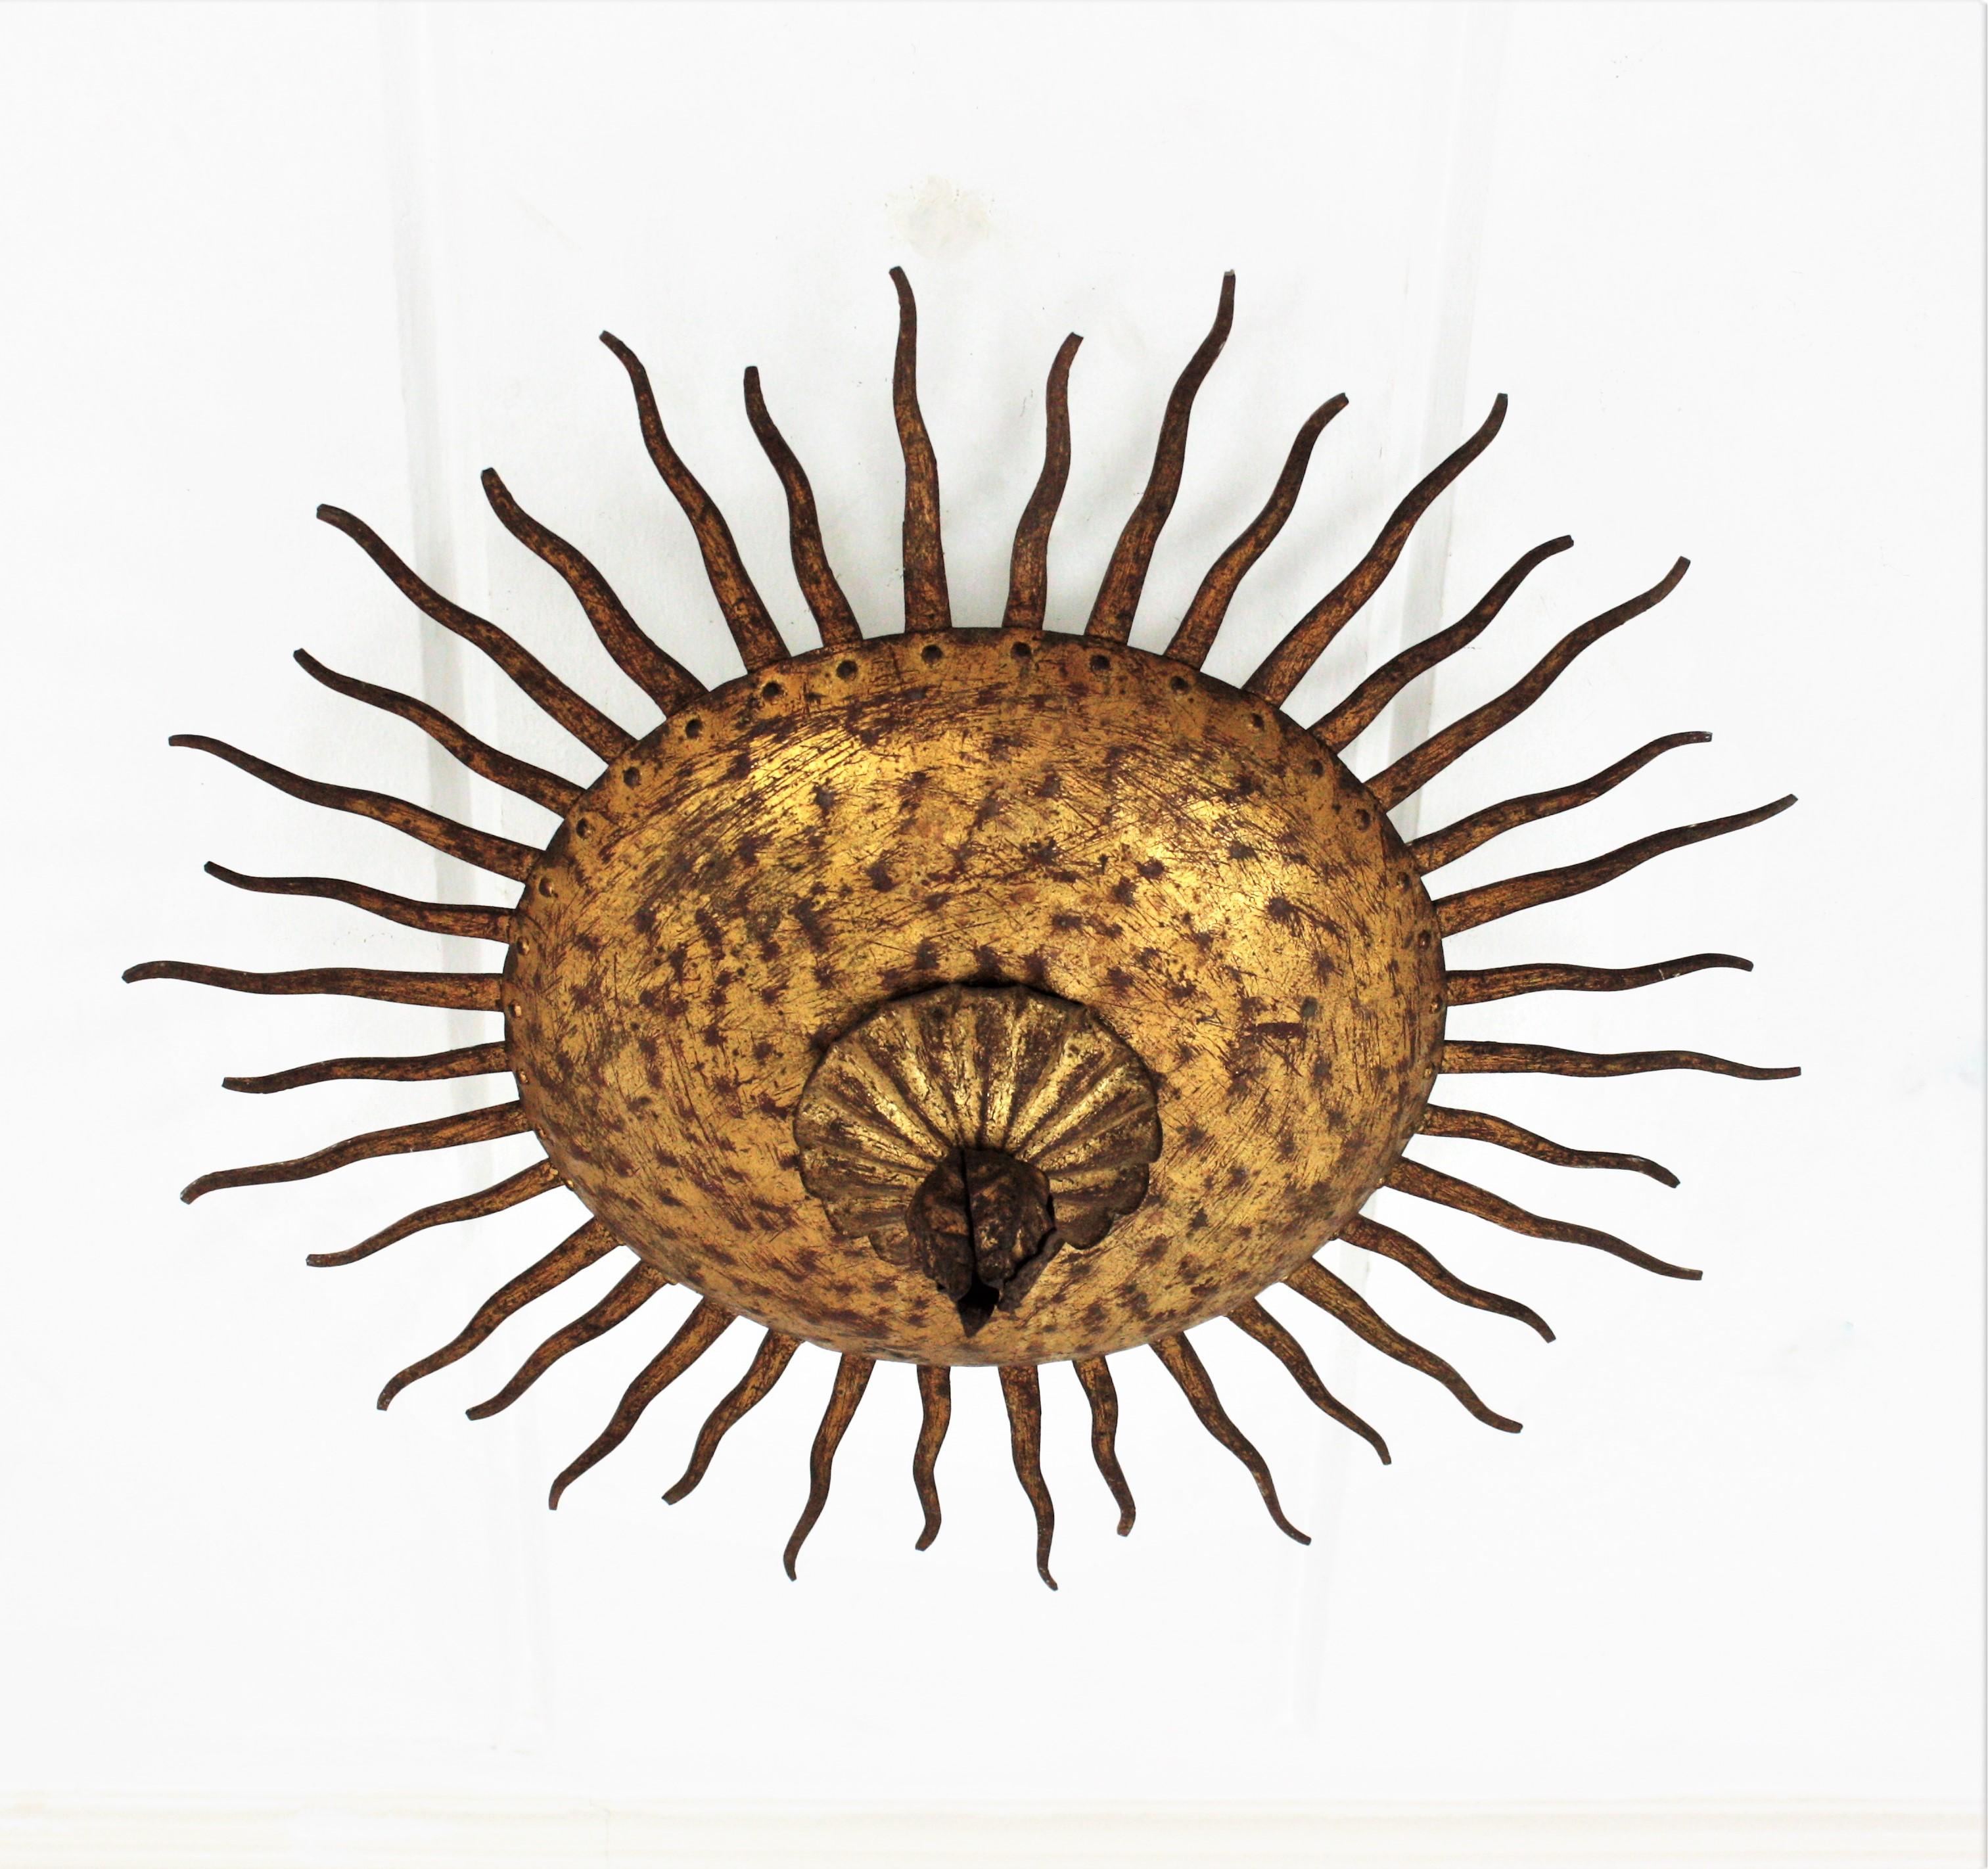 Wrought gilt hand forged iron sunburst flush mount / ceiling light fixture. France, 1950s.
This hand-hammered iron flushmount has alternating rays in two sizes surrounding the central sphere and a flower decoration at the central part. 
This